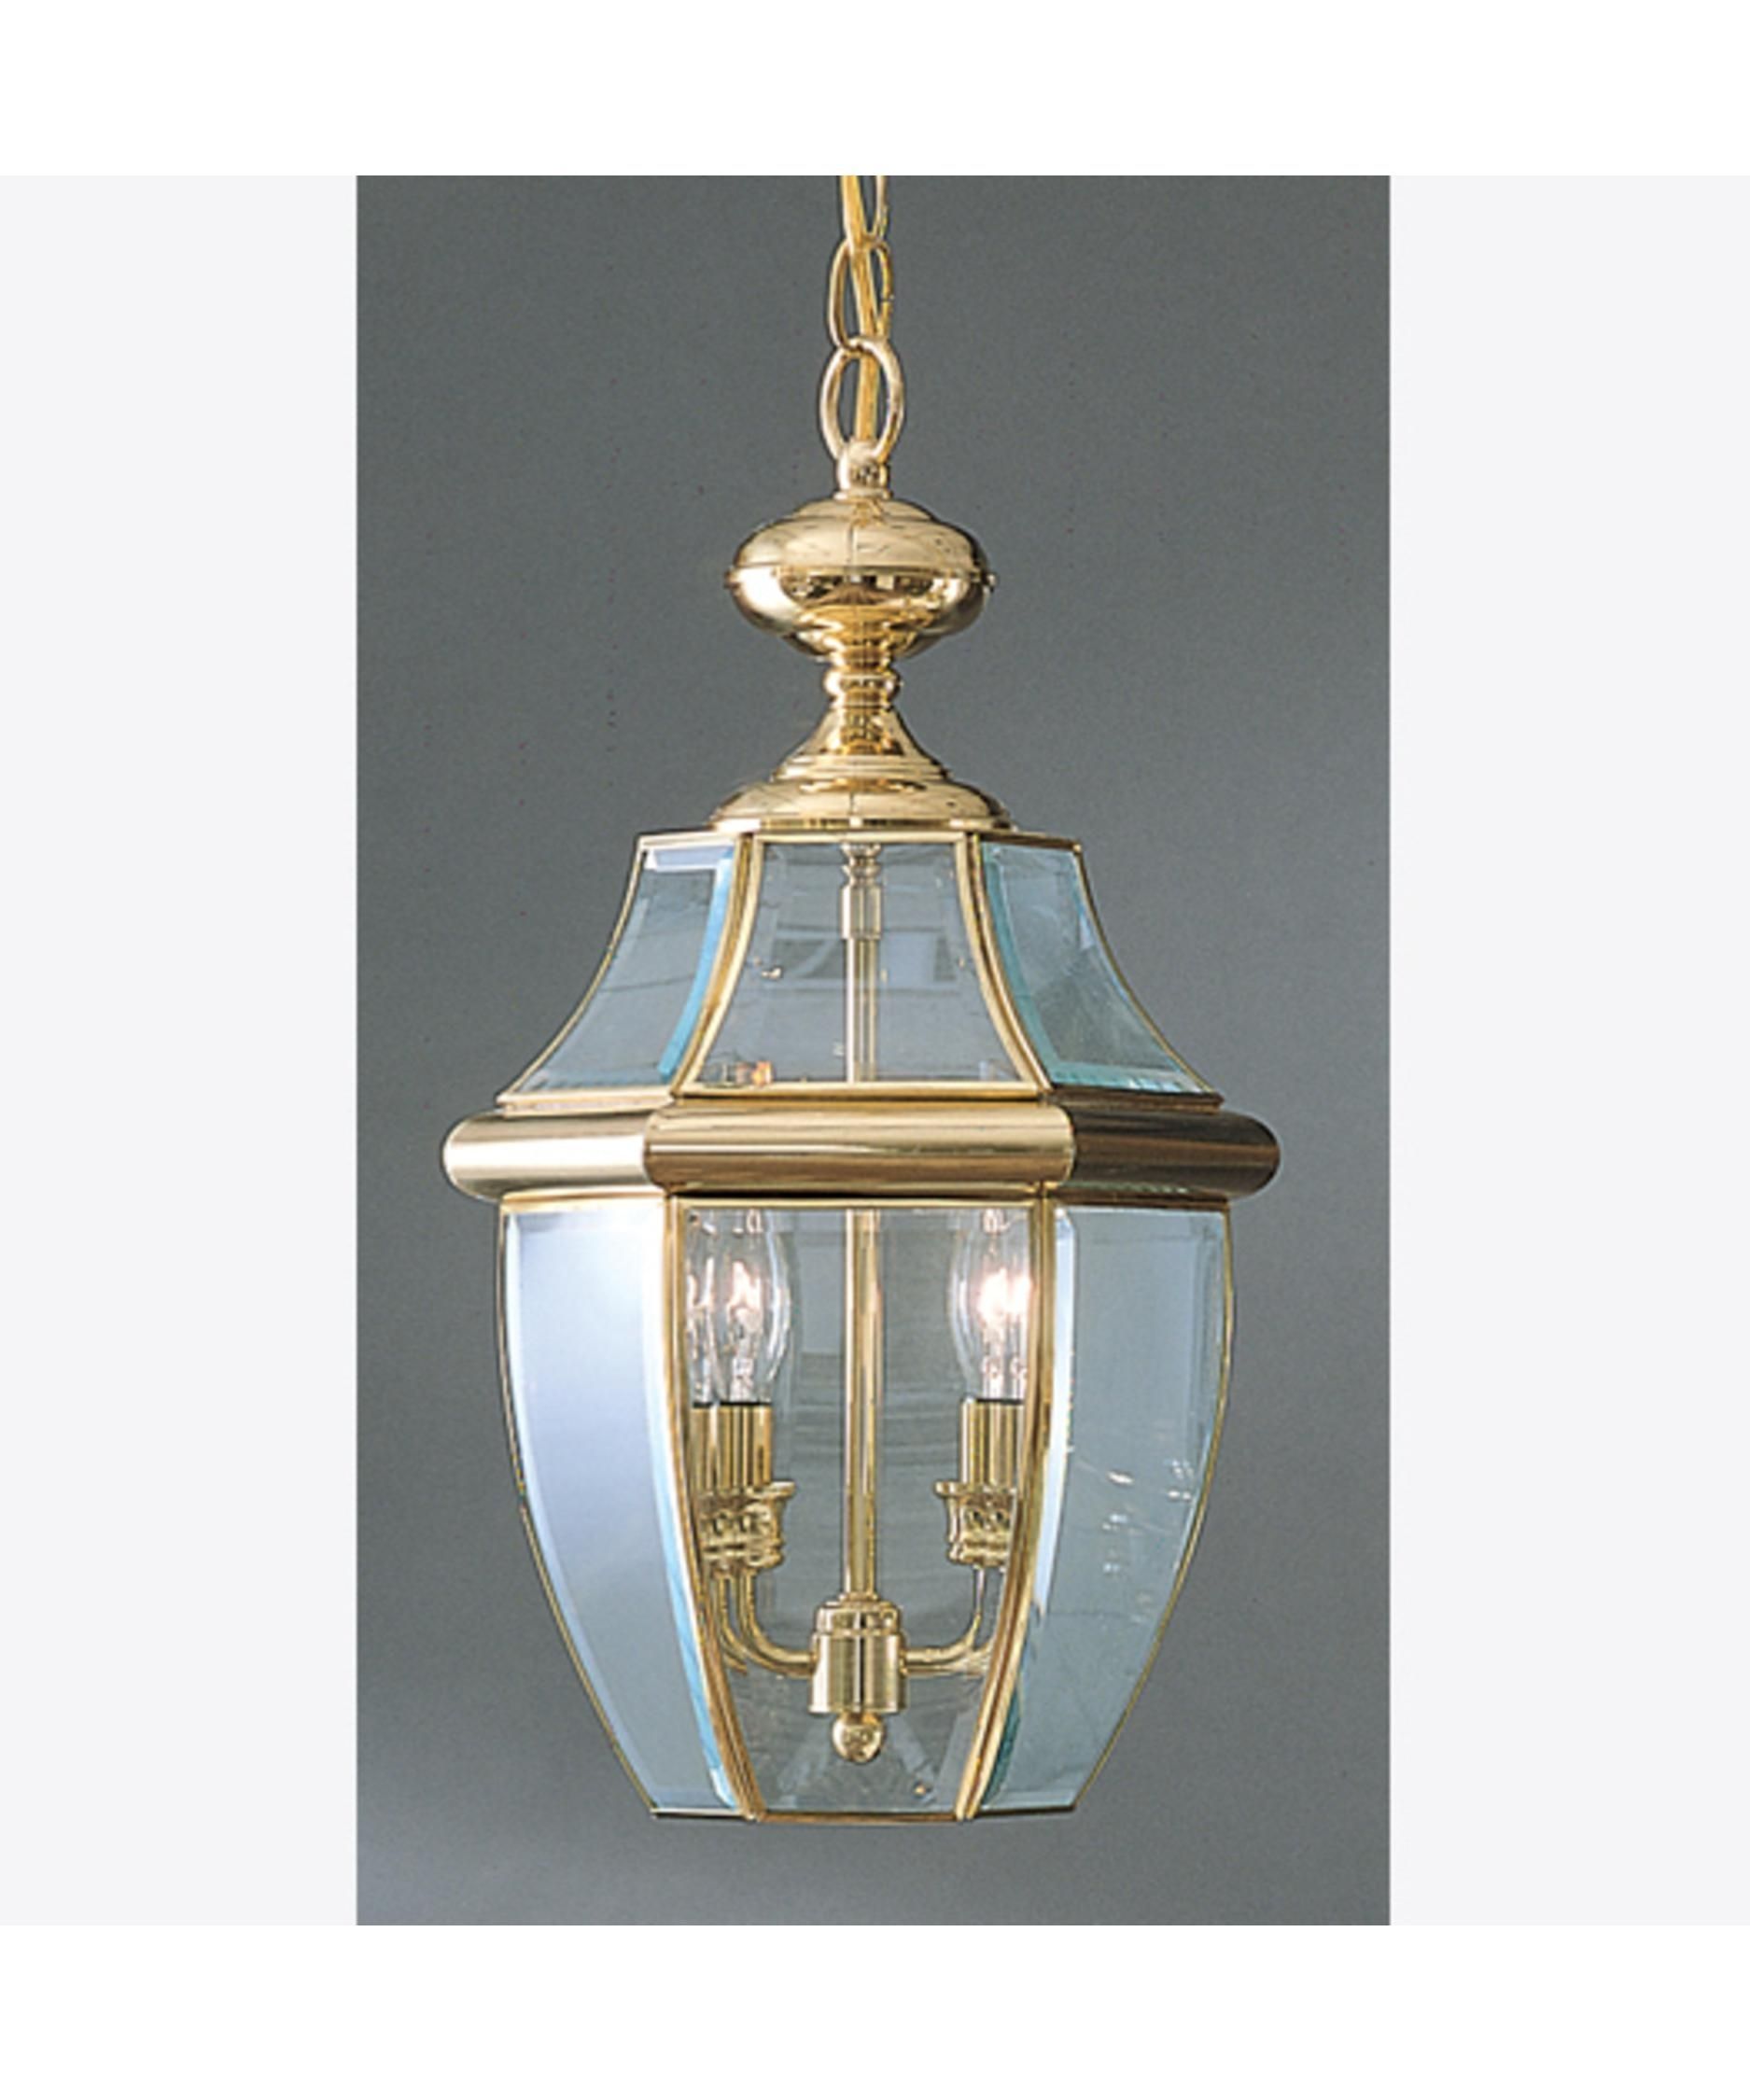 Quoizel Ny1178 Newbury 10 Inch Wide 2 Light Outdoor Hanging Lantern With Quoizel Outdoor Hanging Lights (View 10 of 15)